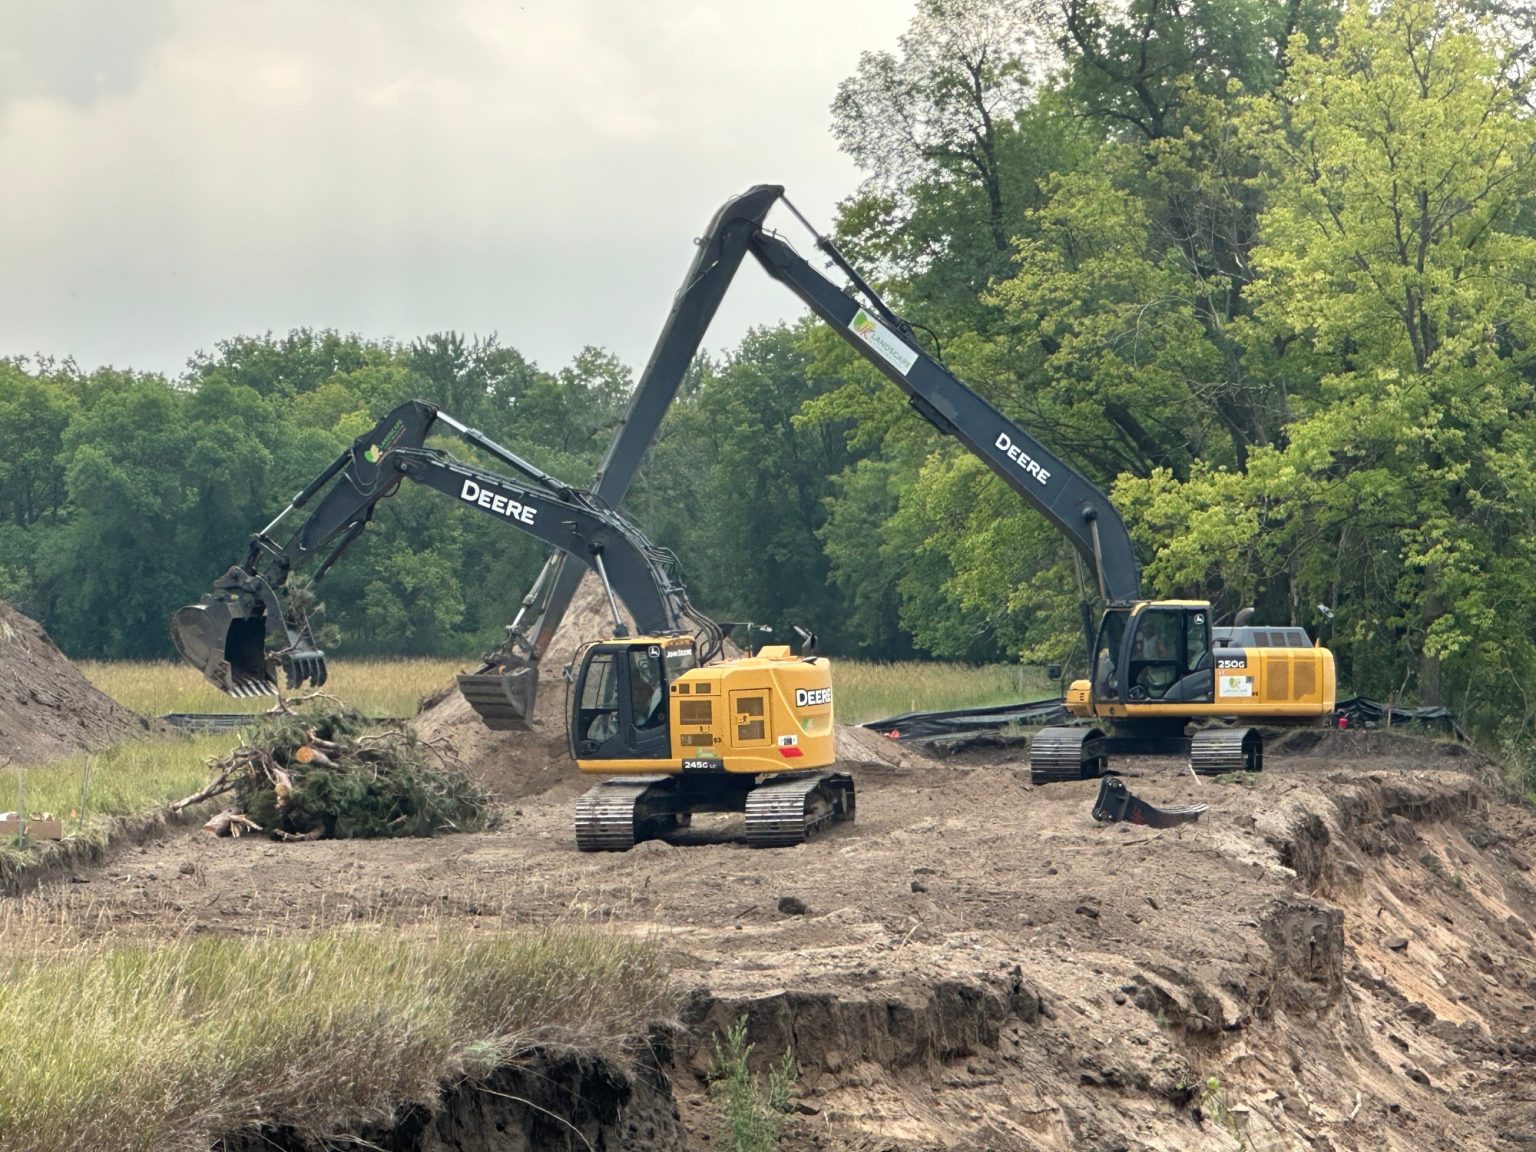 Reasons to Hire a Professional Landscape Excavator